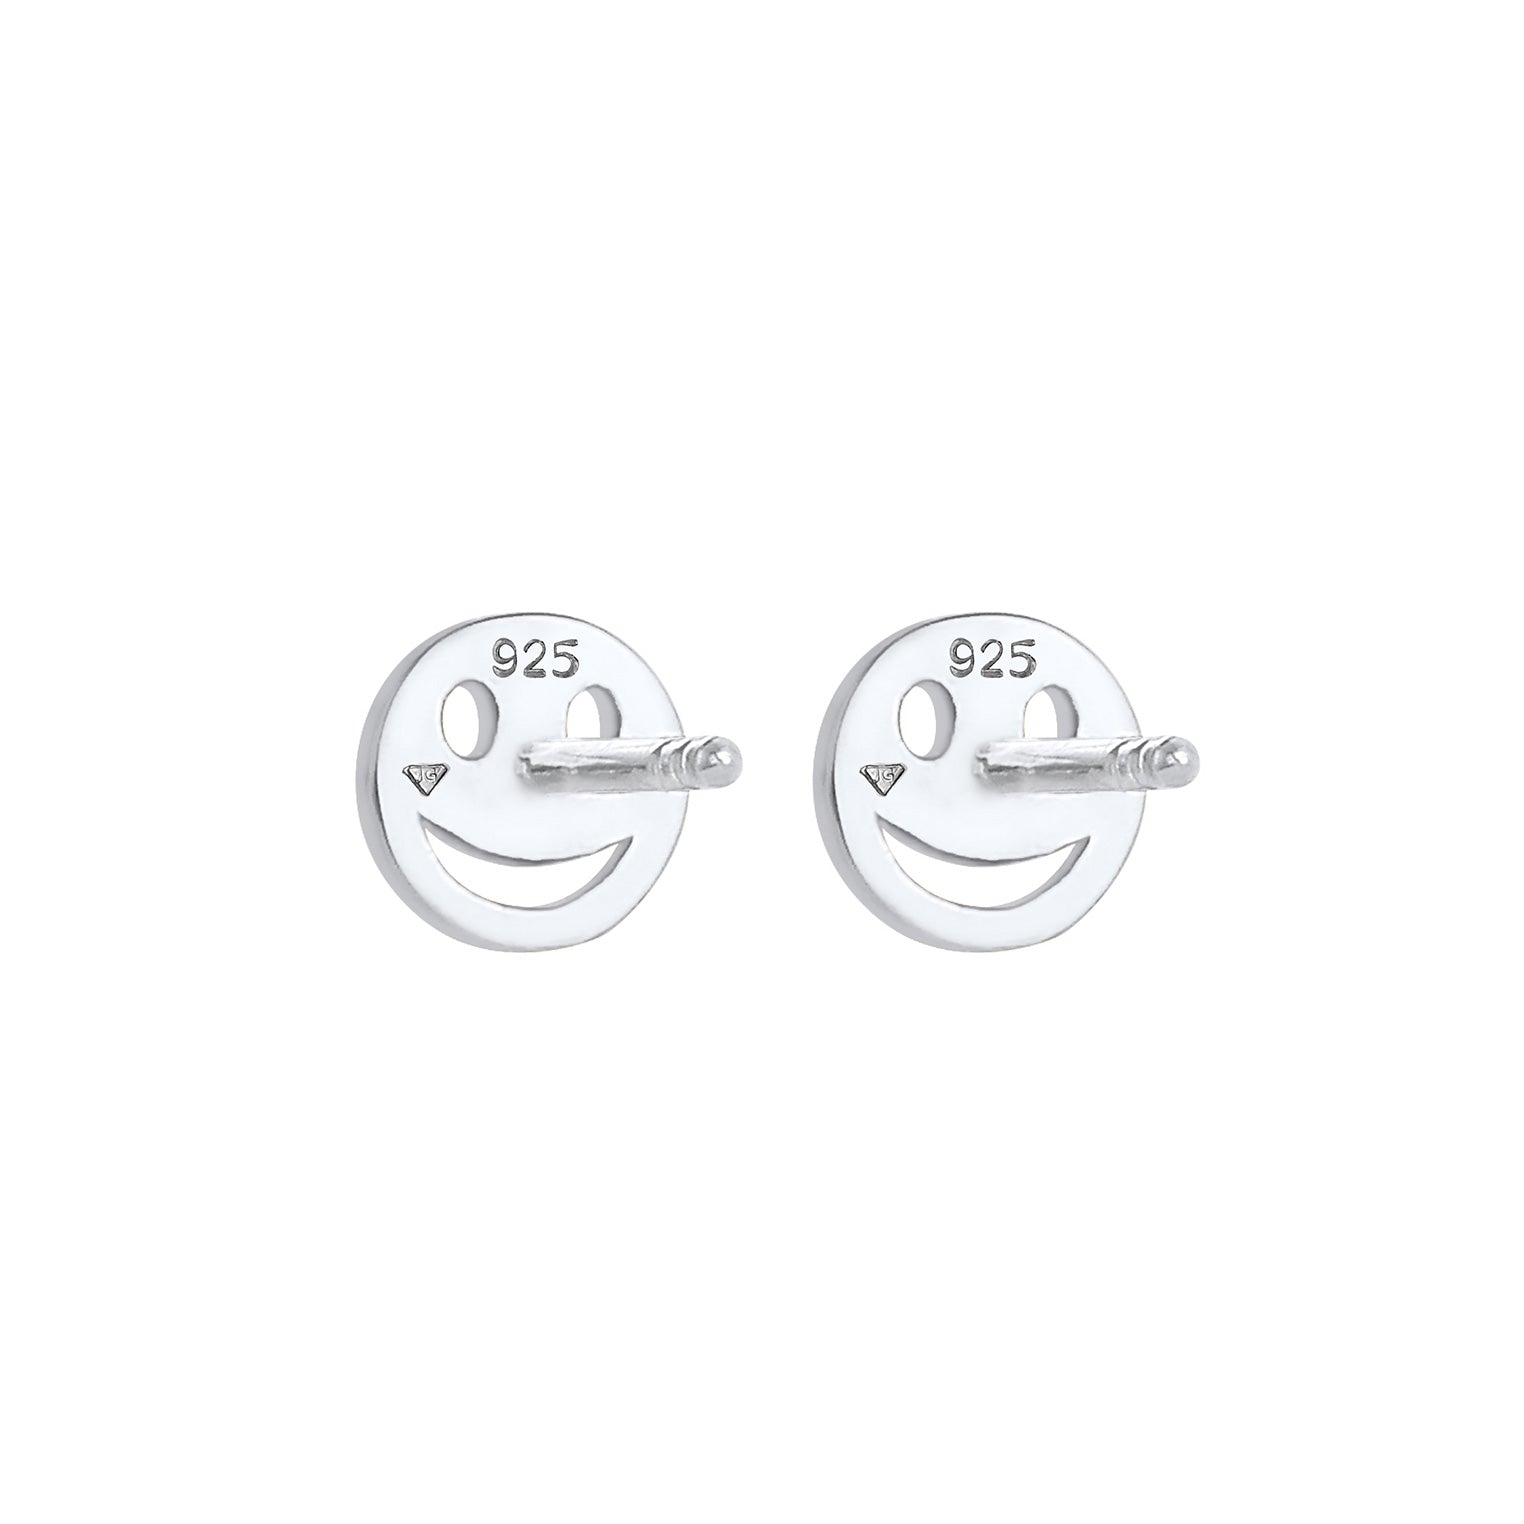 Ohrring Smiling – Face Jewelry mit Elli